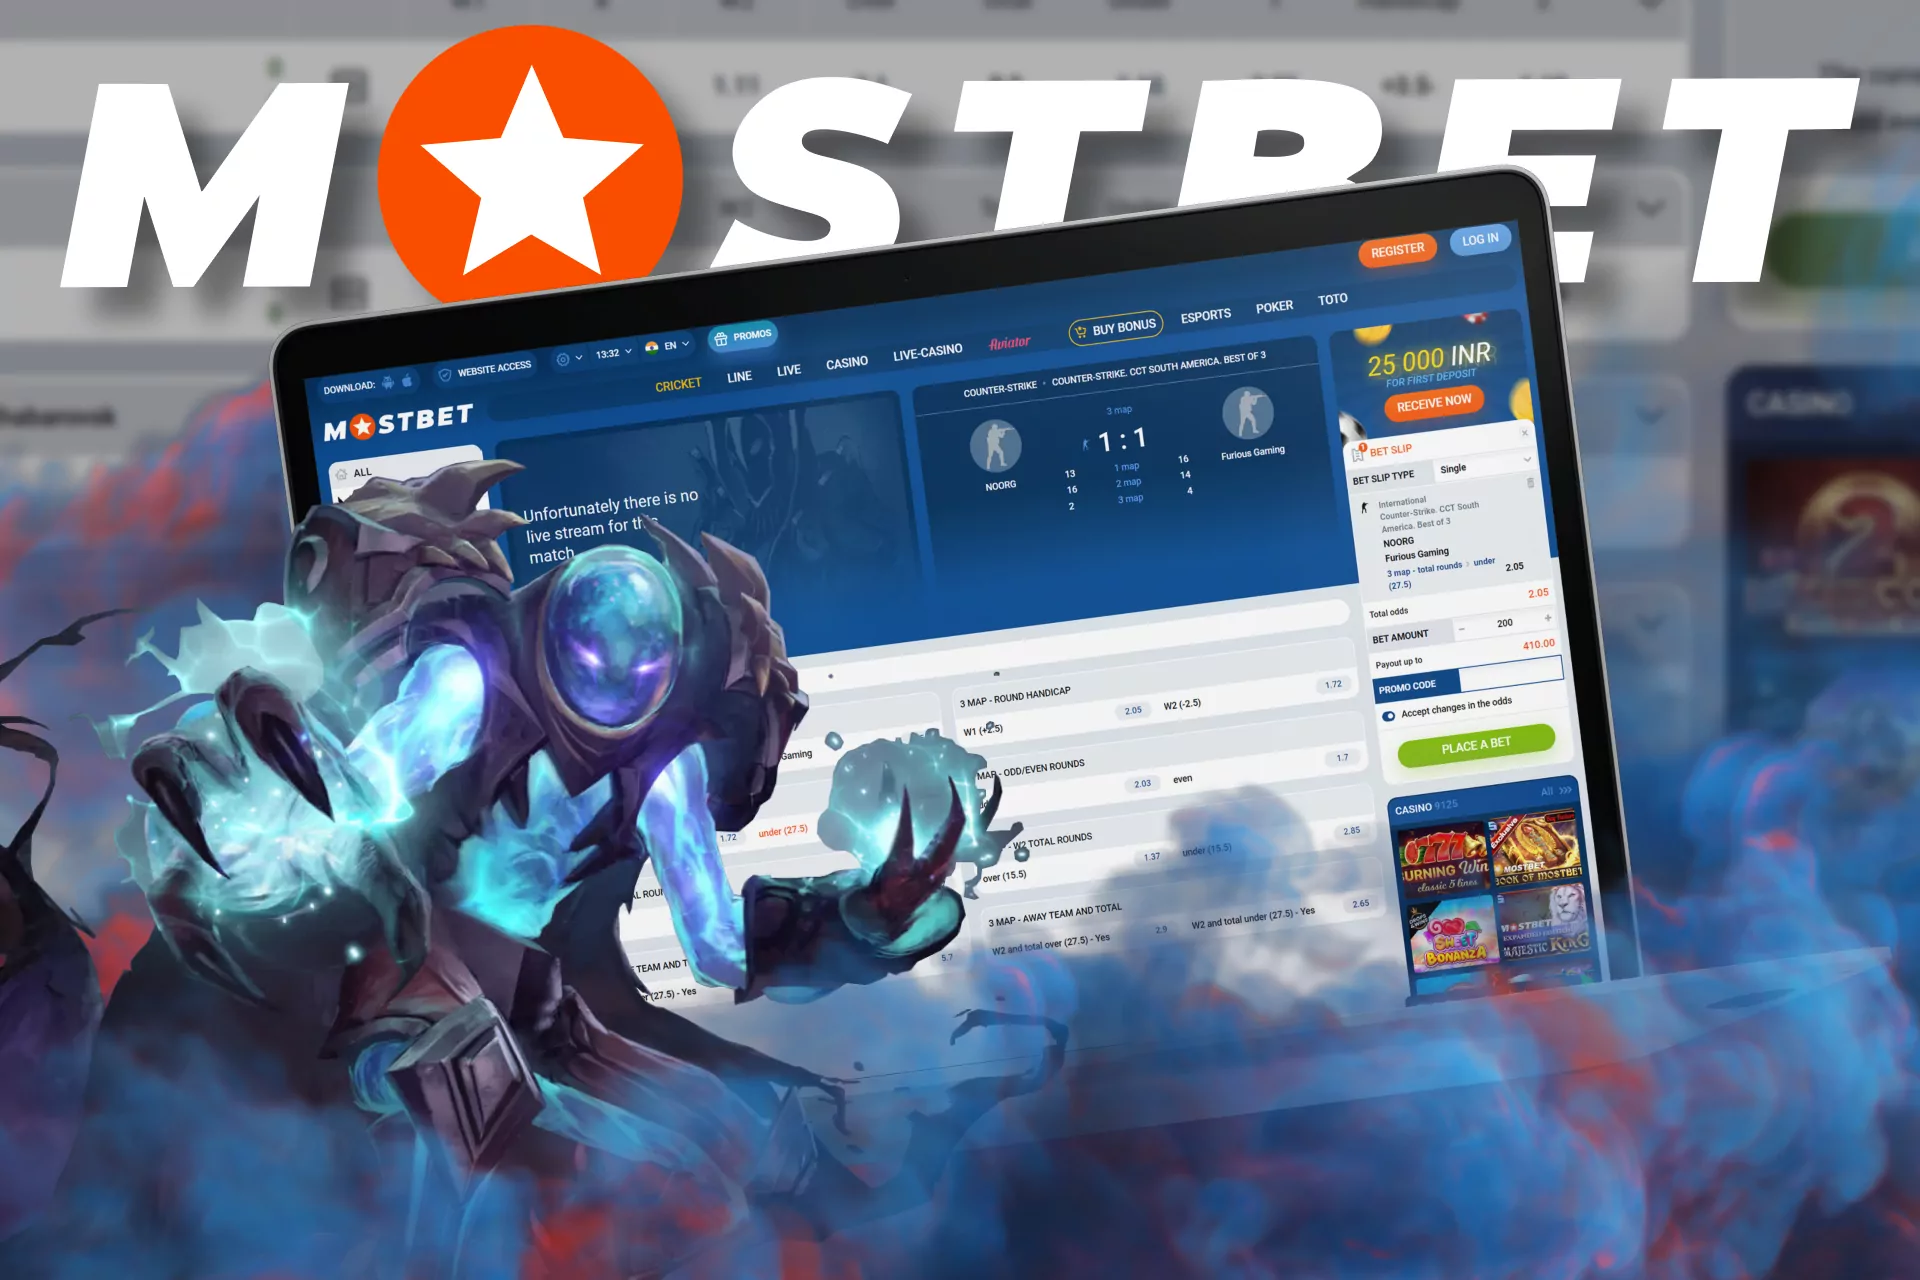 At Mostbet, bet on eSports, virtual and fantasy sports.